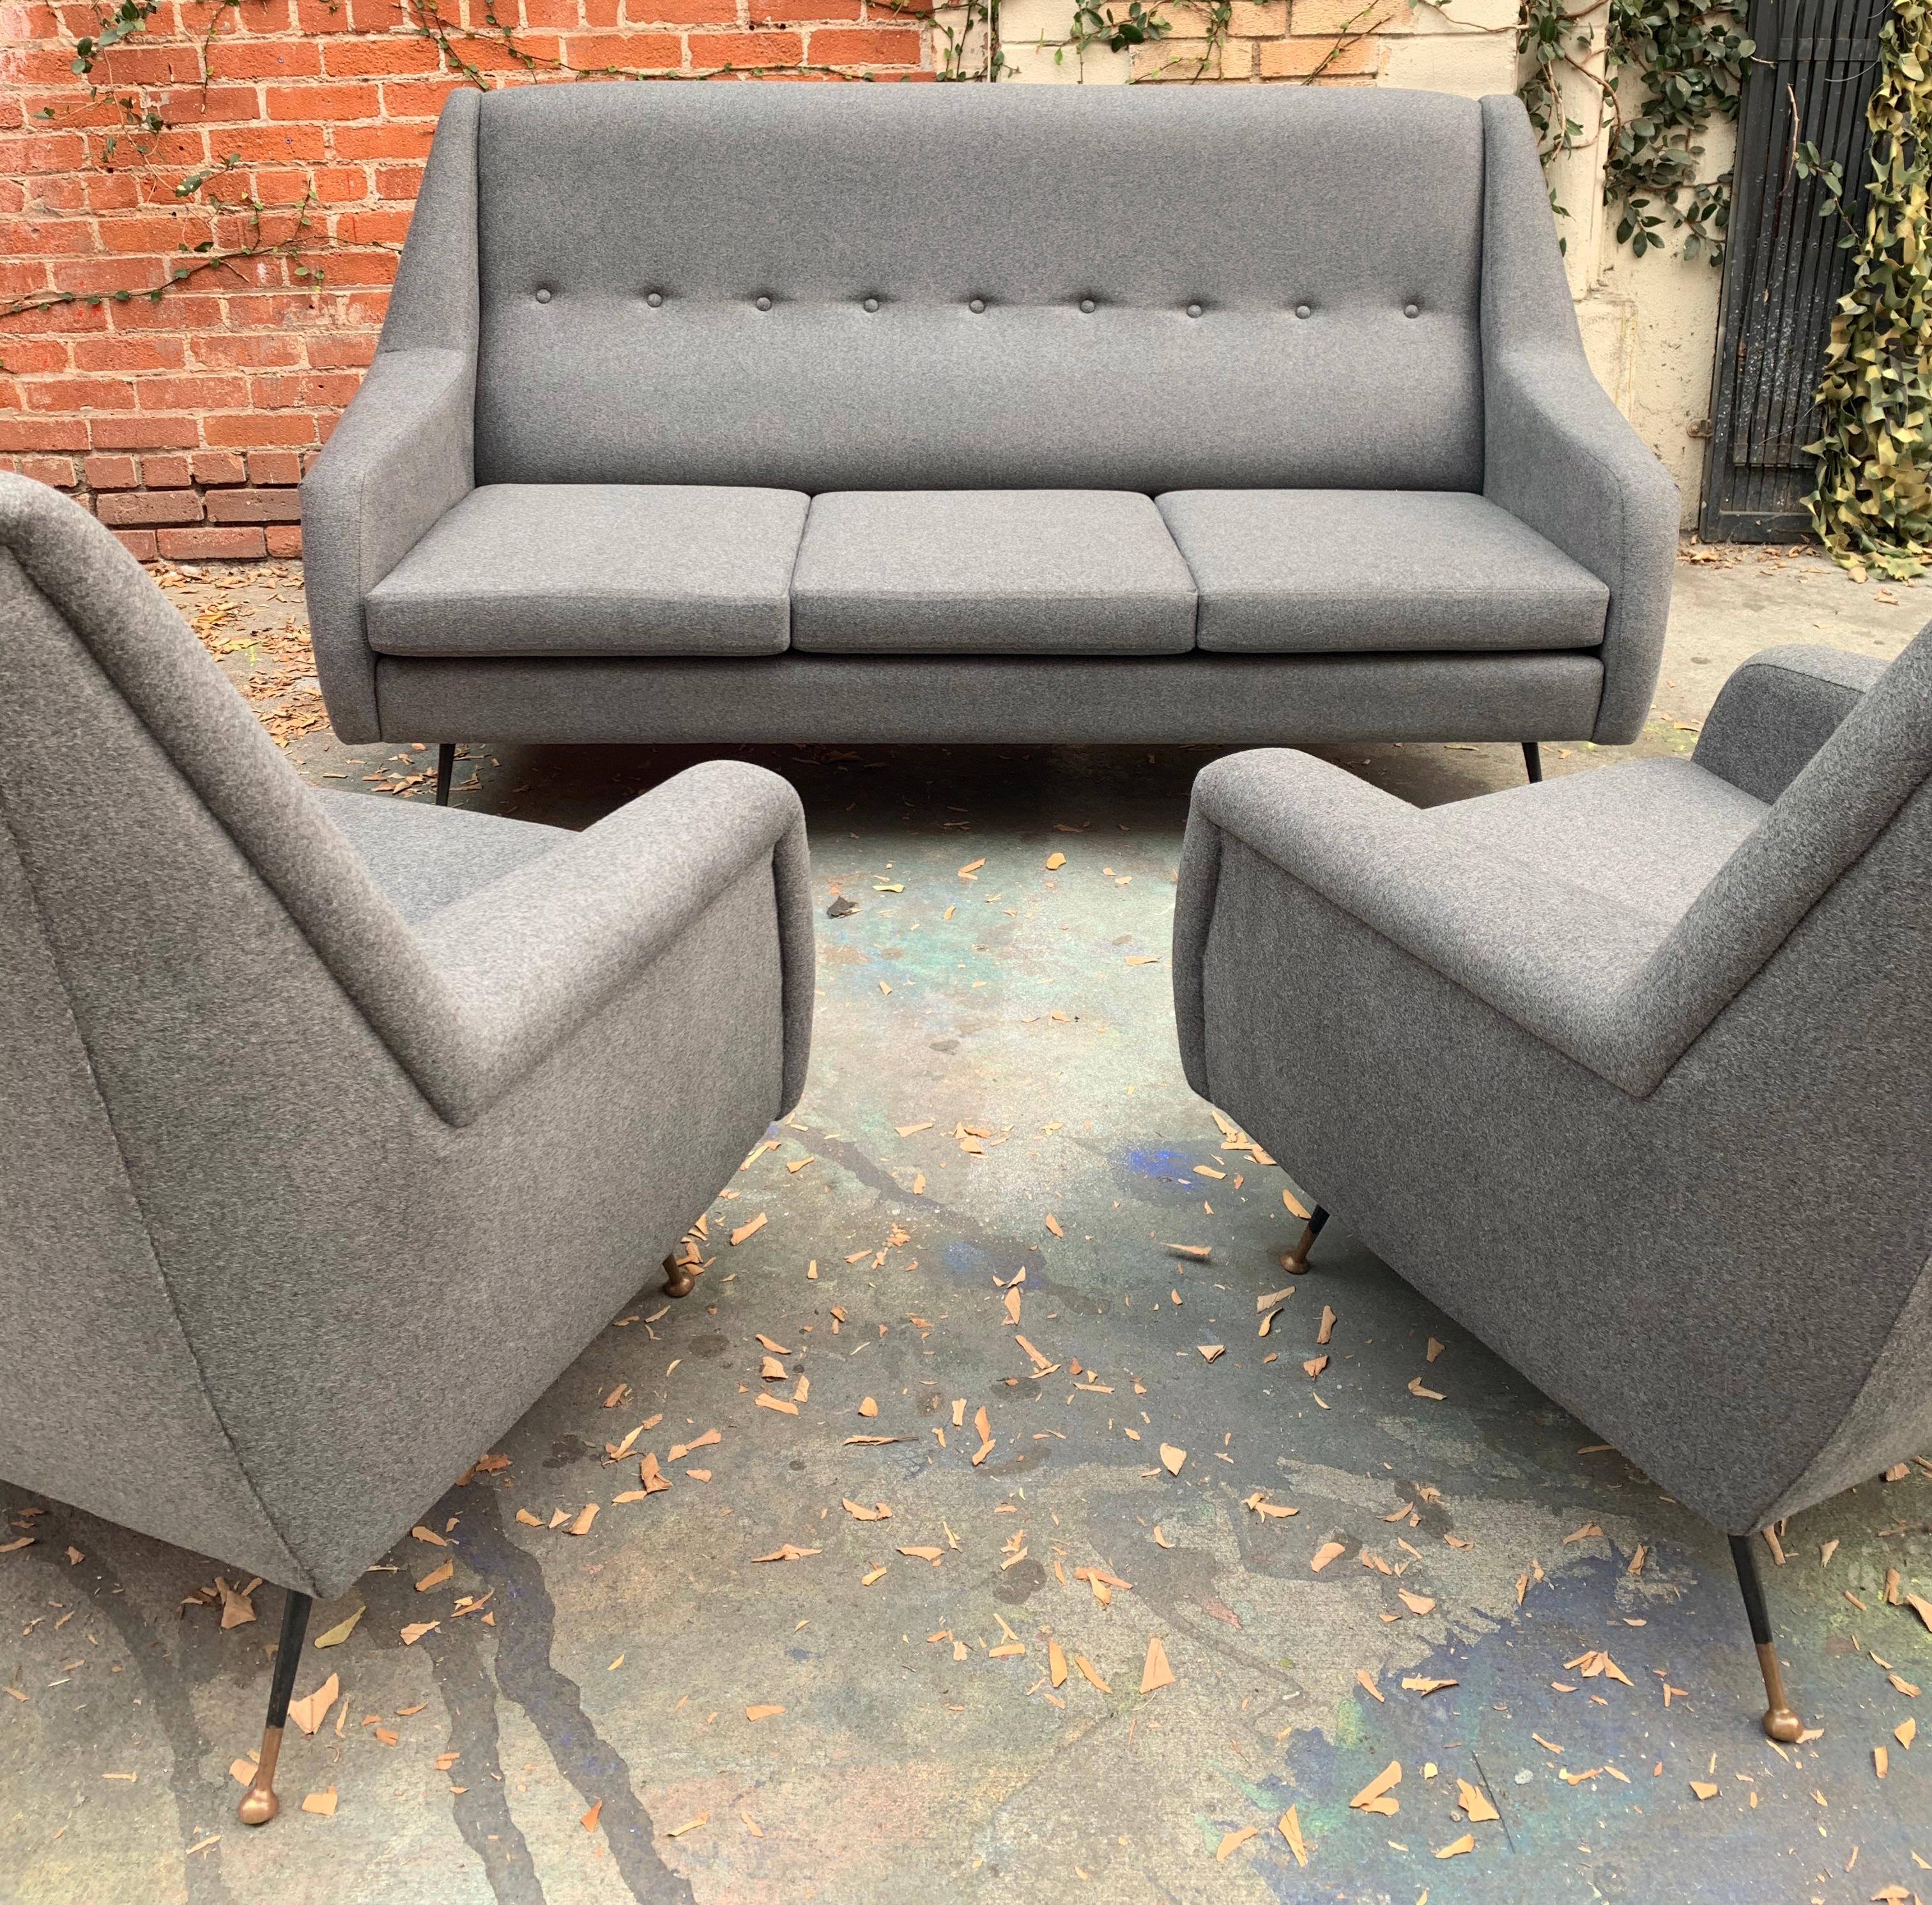 Pair of Italian Midcentury Tufted Chairs by Ico Parisi in Grey Flannel In Good Condition For Sale In West Hollywood, CA